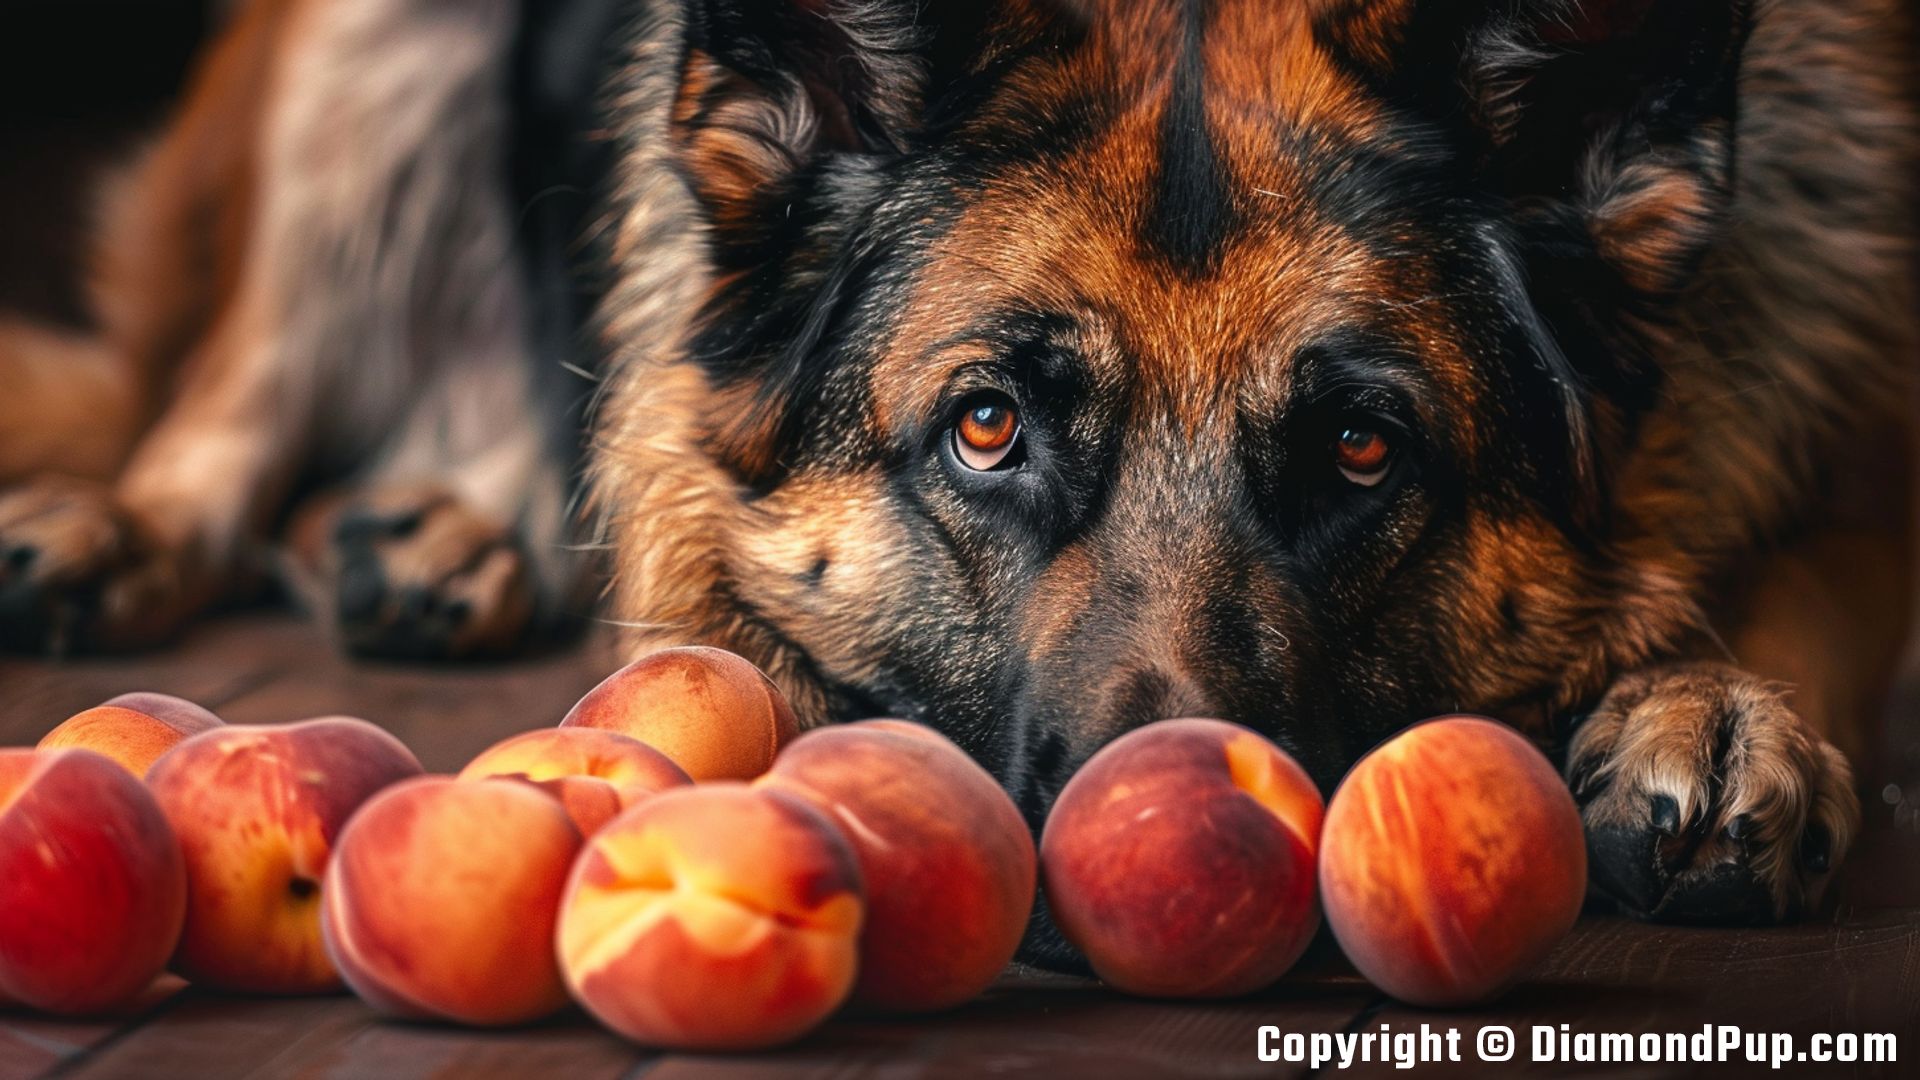 Photograph of a Playful German Shepherd Snacking on Peaches